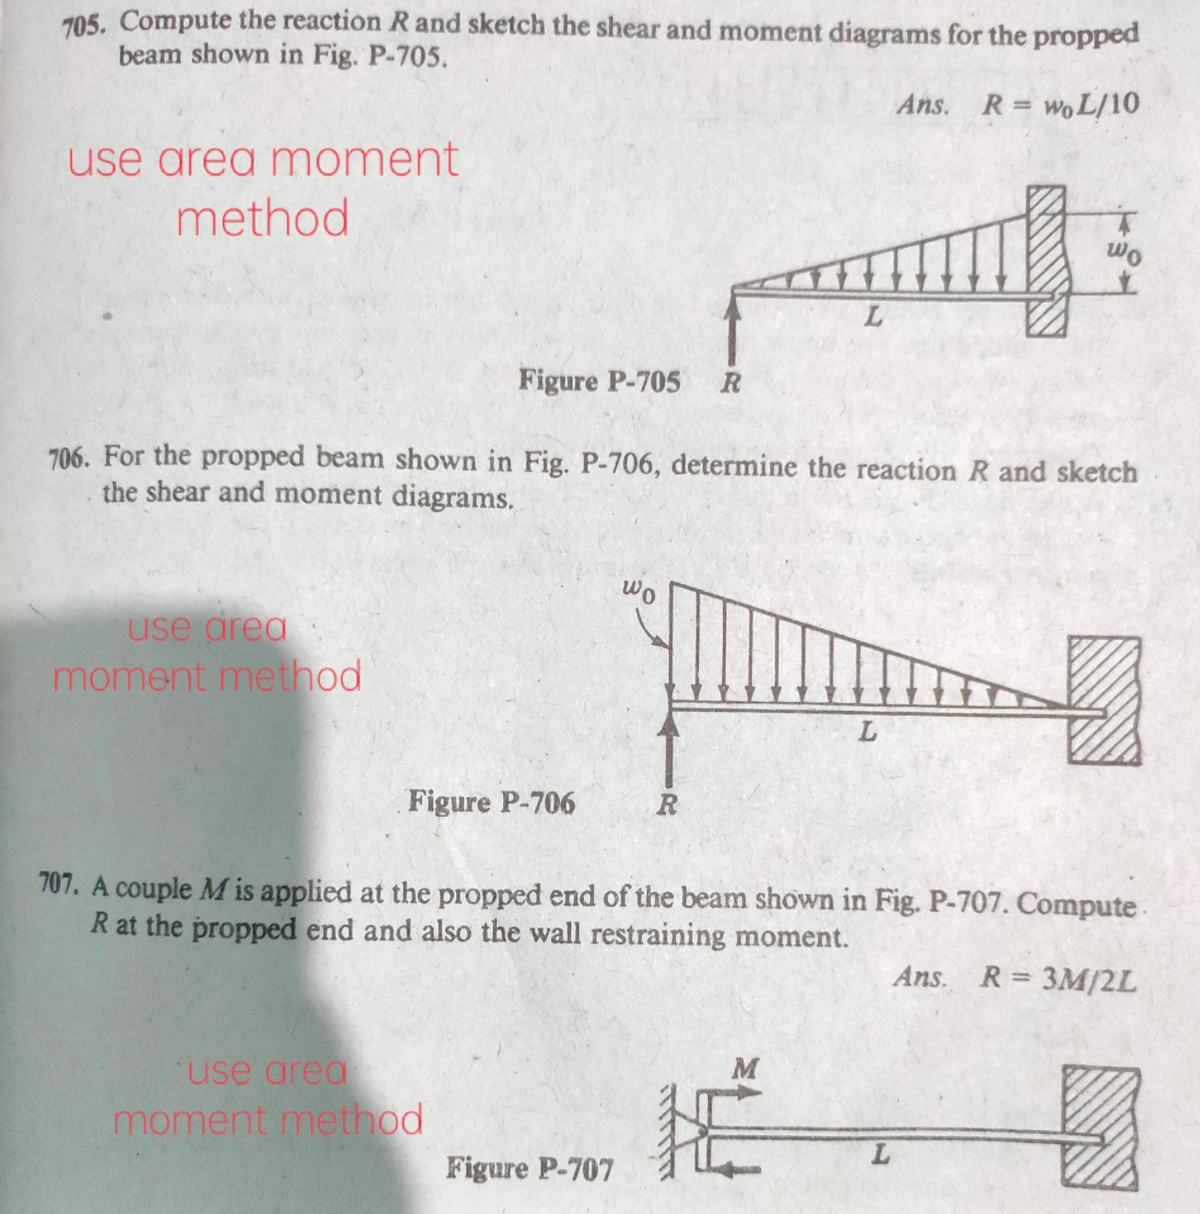 705. Compute the reaction Rand sketch the shear and moment diagrams for the propped
beam shown in Fig. P-705.
Ans. R= woL/10
use area moment
method
wo
Figure P-705
706. For the propped beam shown in Fig. P-706, determine the reaction R and sketch
the shear and moment diagrams.
wo
use area
moment method
Figure P-706
R
707. A couple M is applied at the propped end of the beam shown in Fig. P-707. Compute
R at the propped end and also the wall restraining moment.
Ans. R= 3M/2L
use area
M
moment method
Figure P-707
